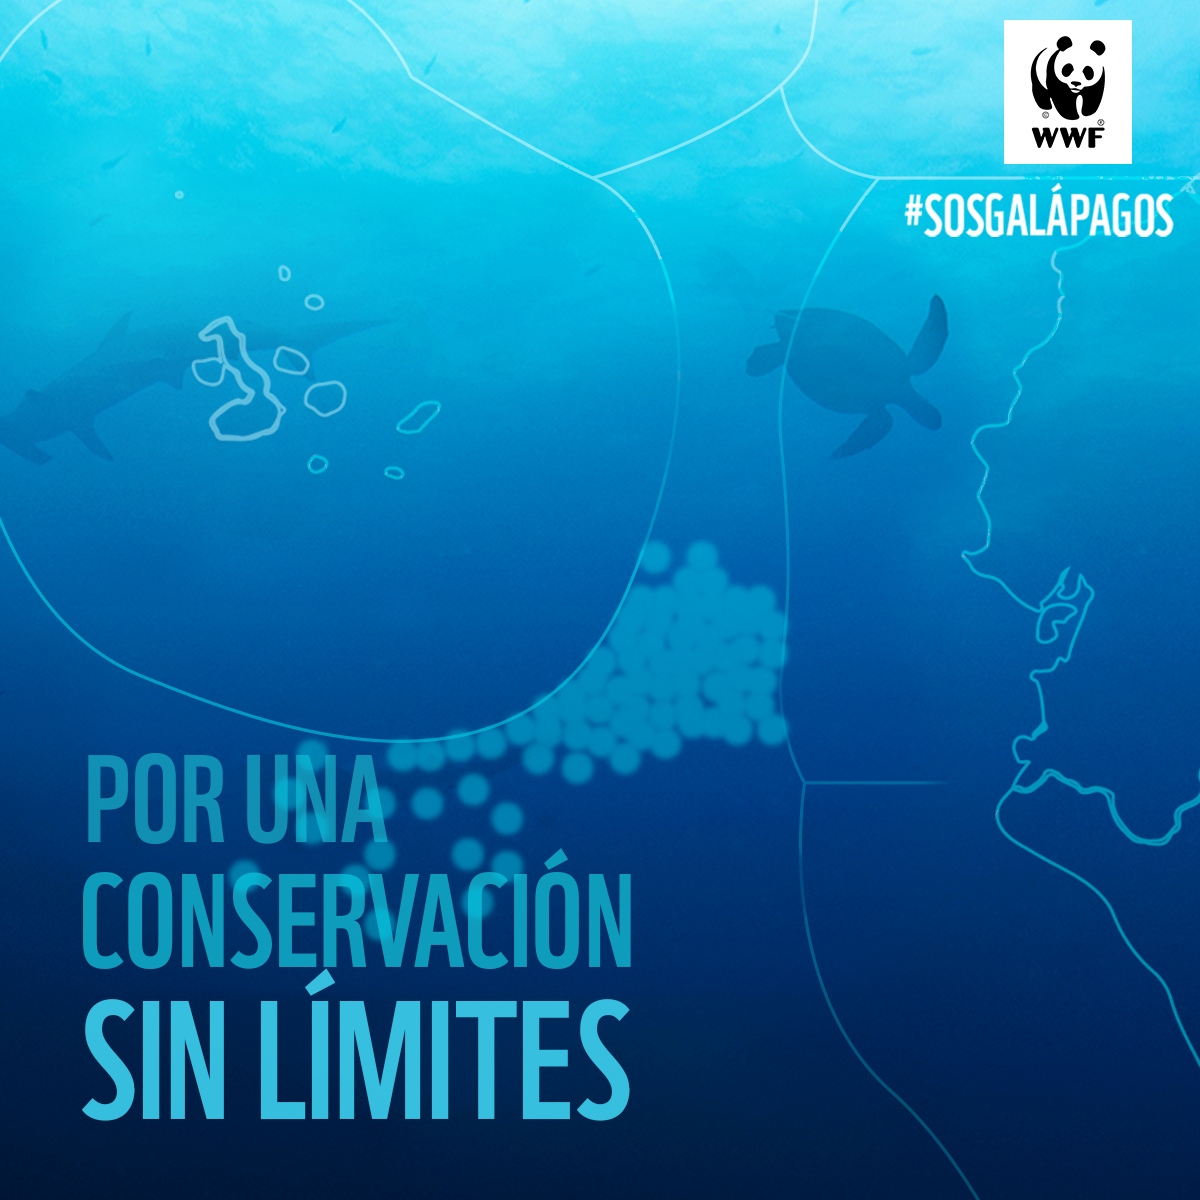 WWF galapagos conservation